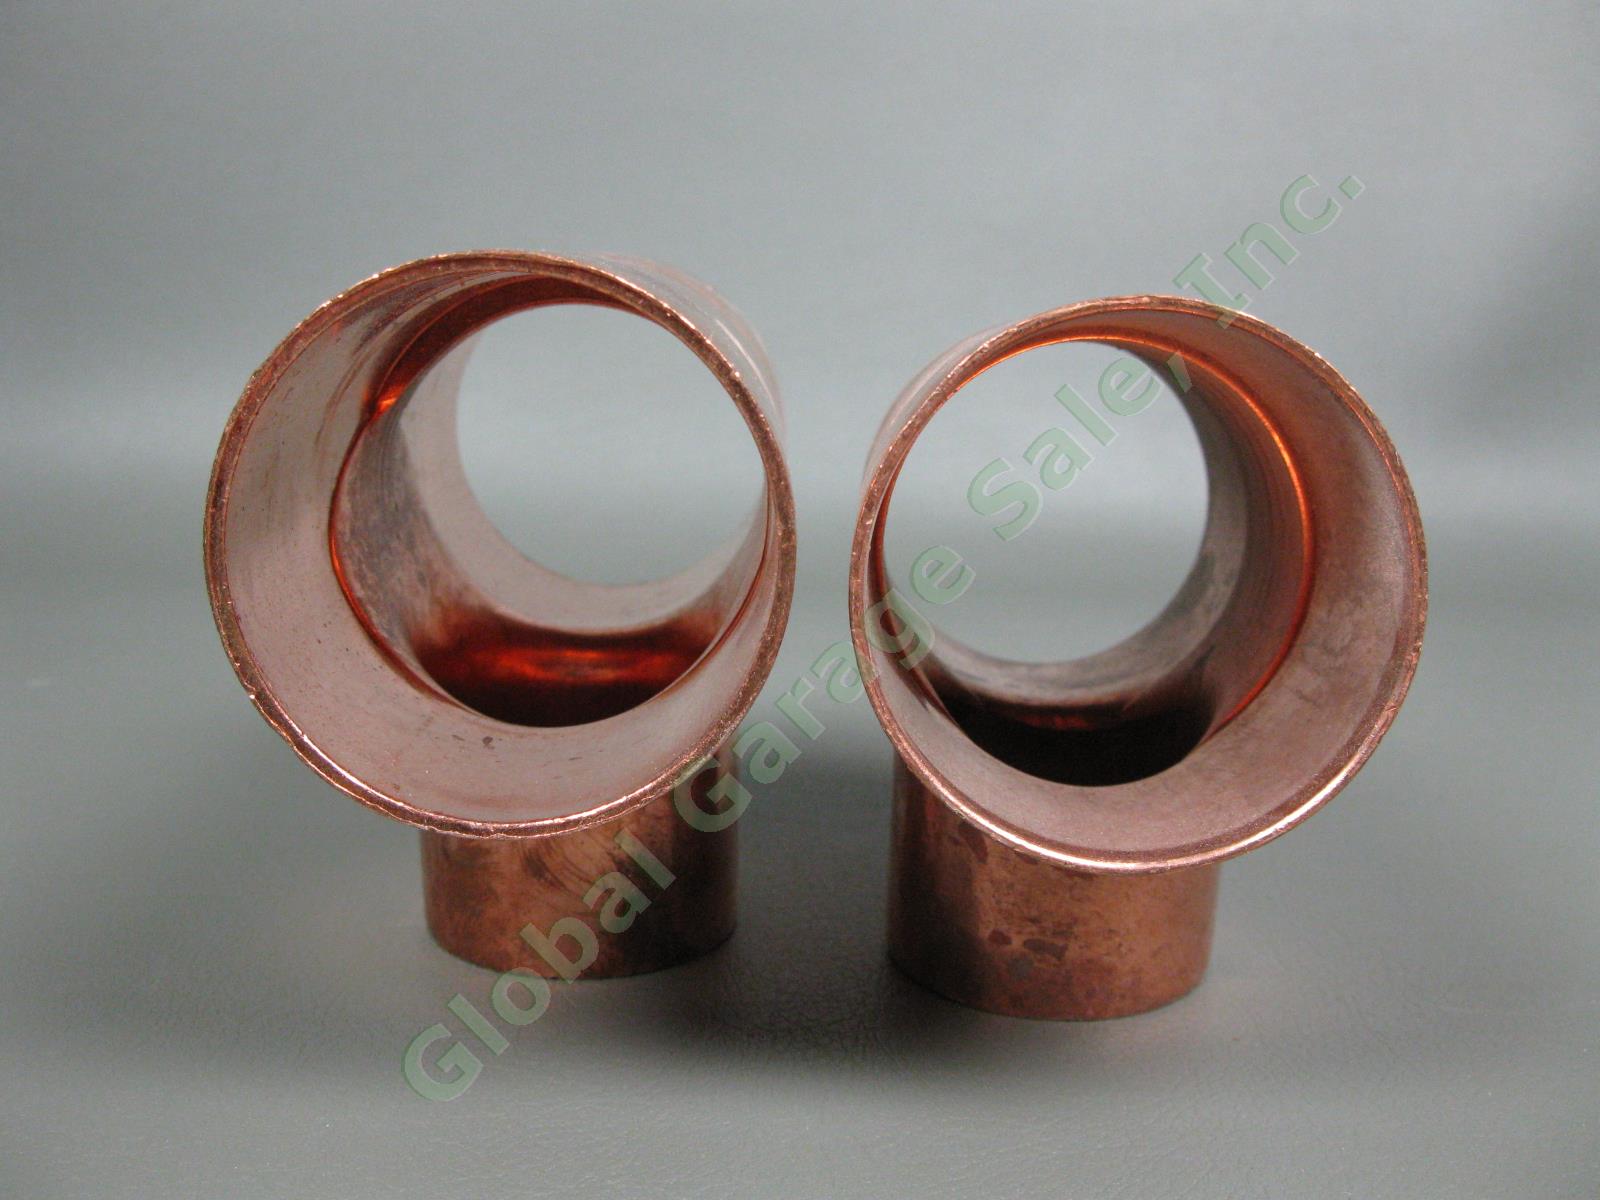 2 NEW Nibco 2" x 2" x 1-1/2" Copper EPC Reducing Sweat Tees Pipe Fittings Pair 3